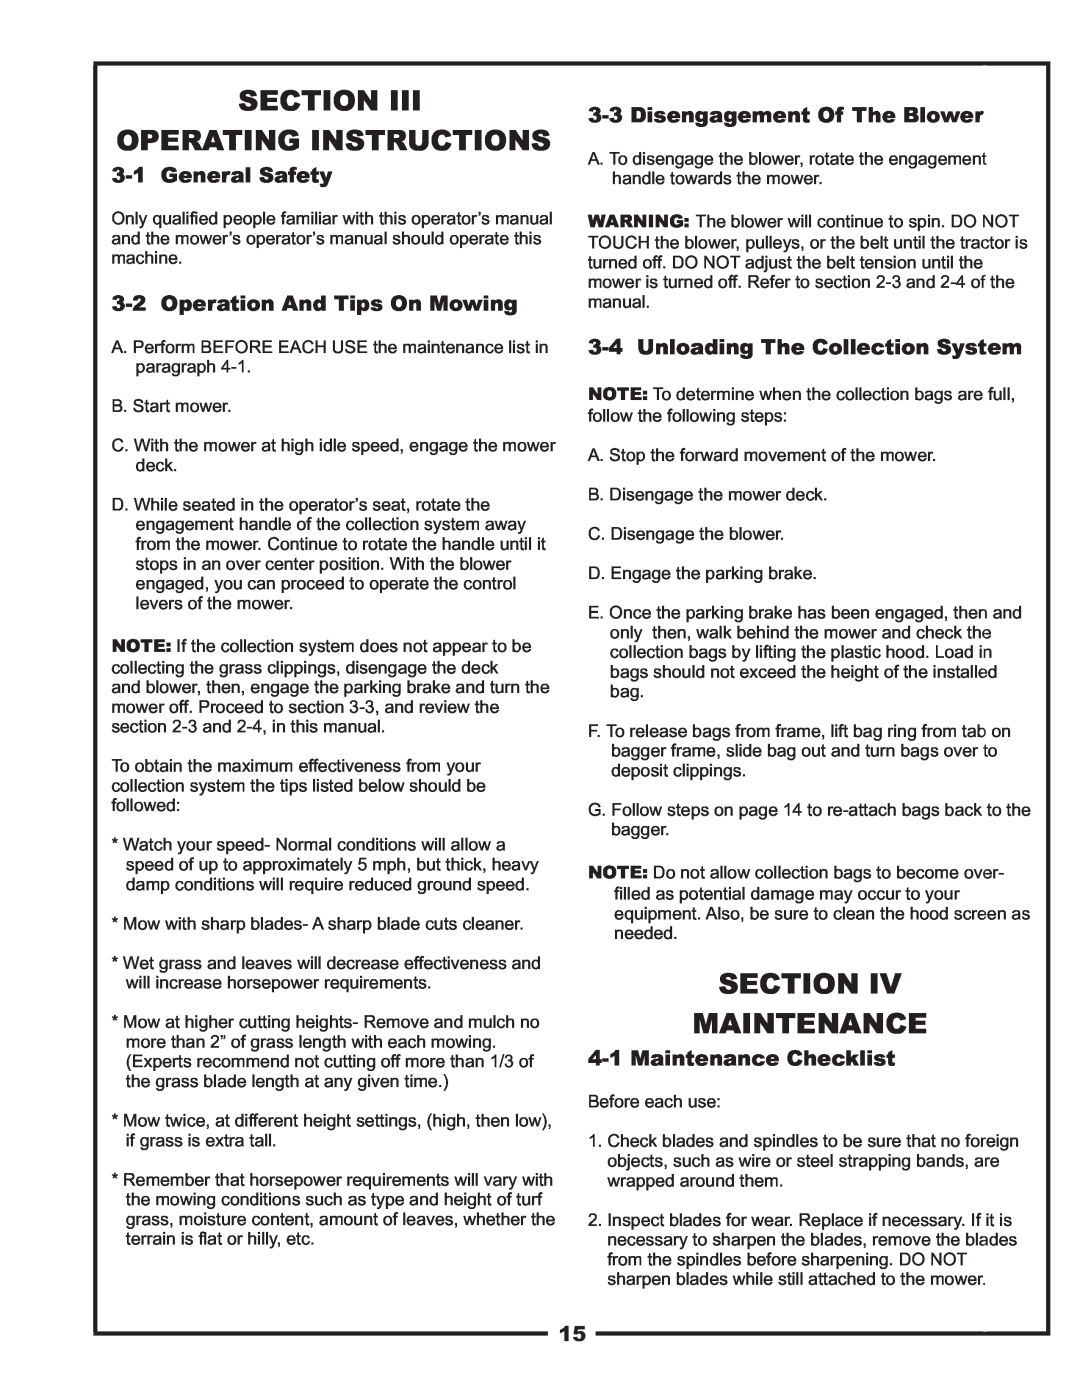 Bad Boy Mowers 48031301 Section Operating Instructions, Section Maintenance, 3-1General Safety, 4-1Maintenance Checklist 